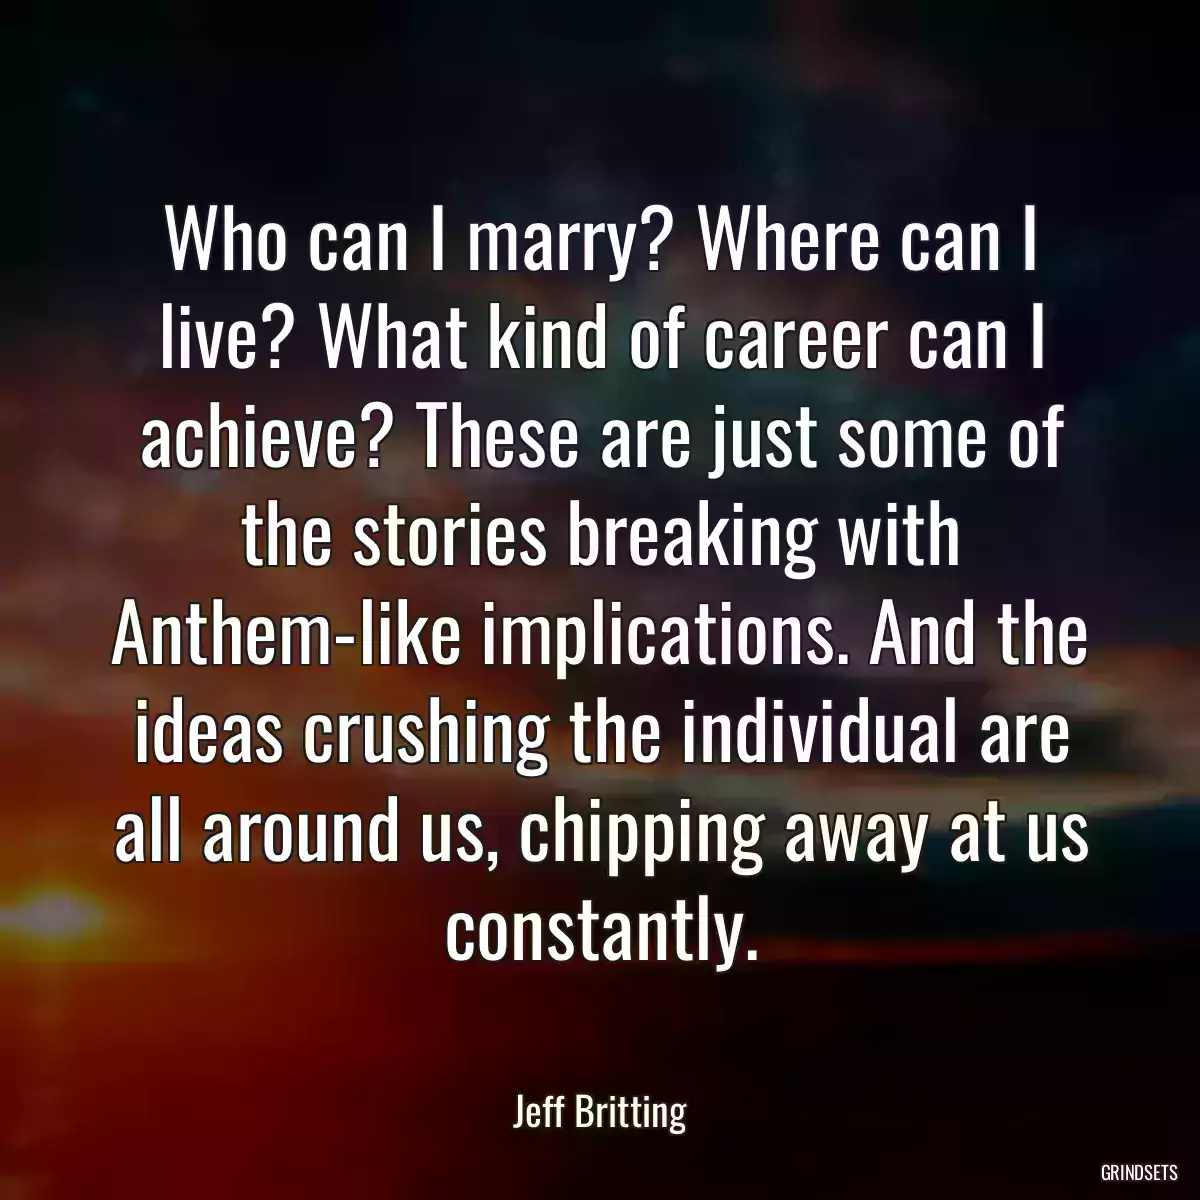 Who can I marry? Where can I live? What kind of career can I achieve? These are just some of the stories breaking with Anthem-like implications. And the ideas crushing the individual are all around us, chipping away at us constantly.